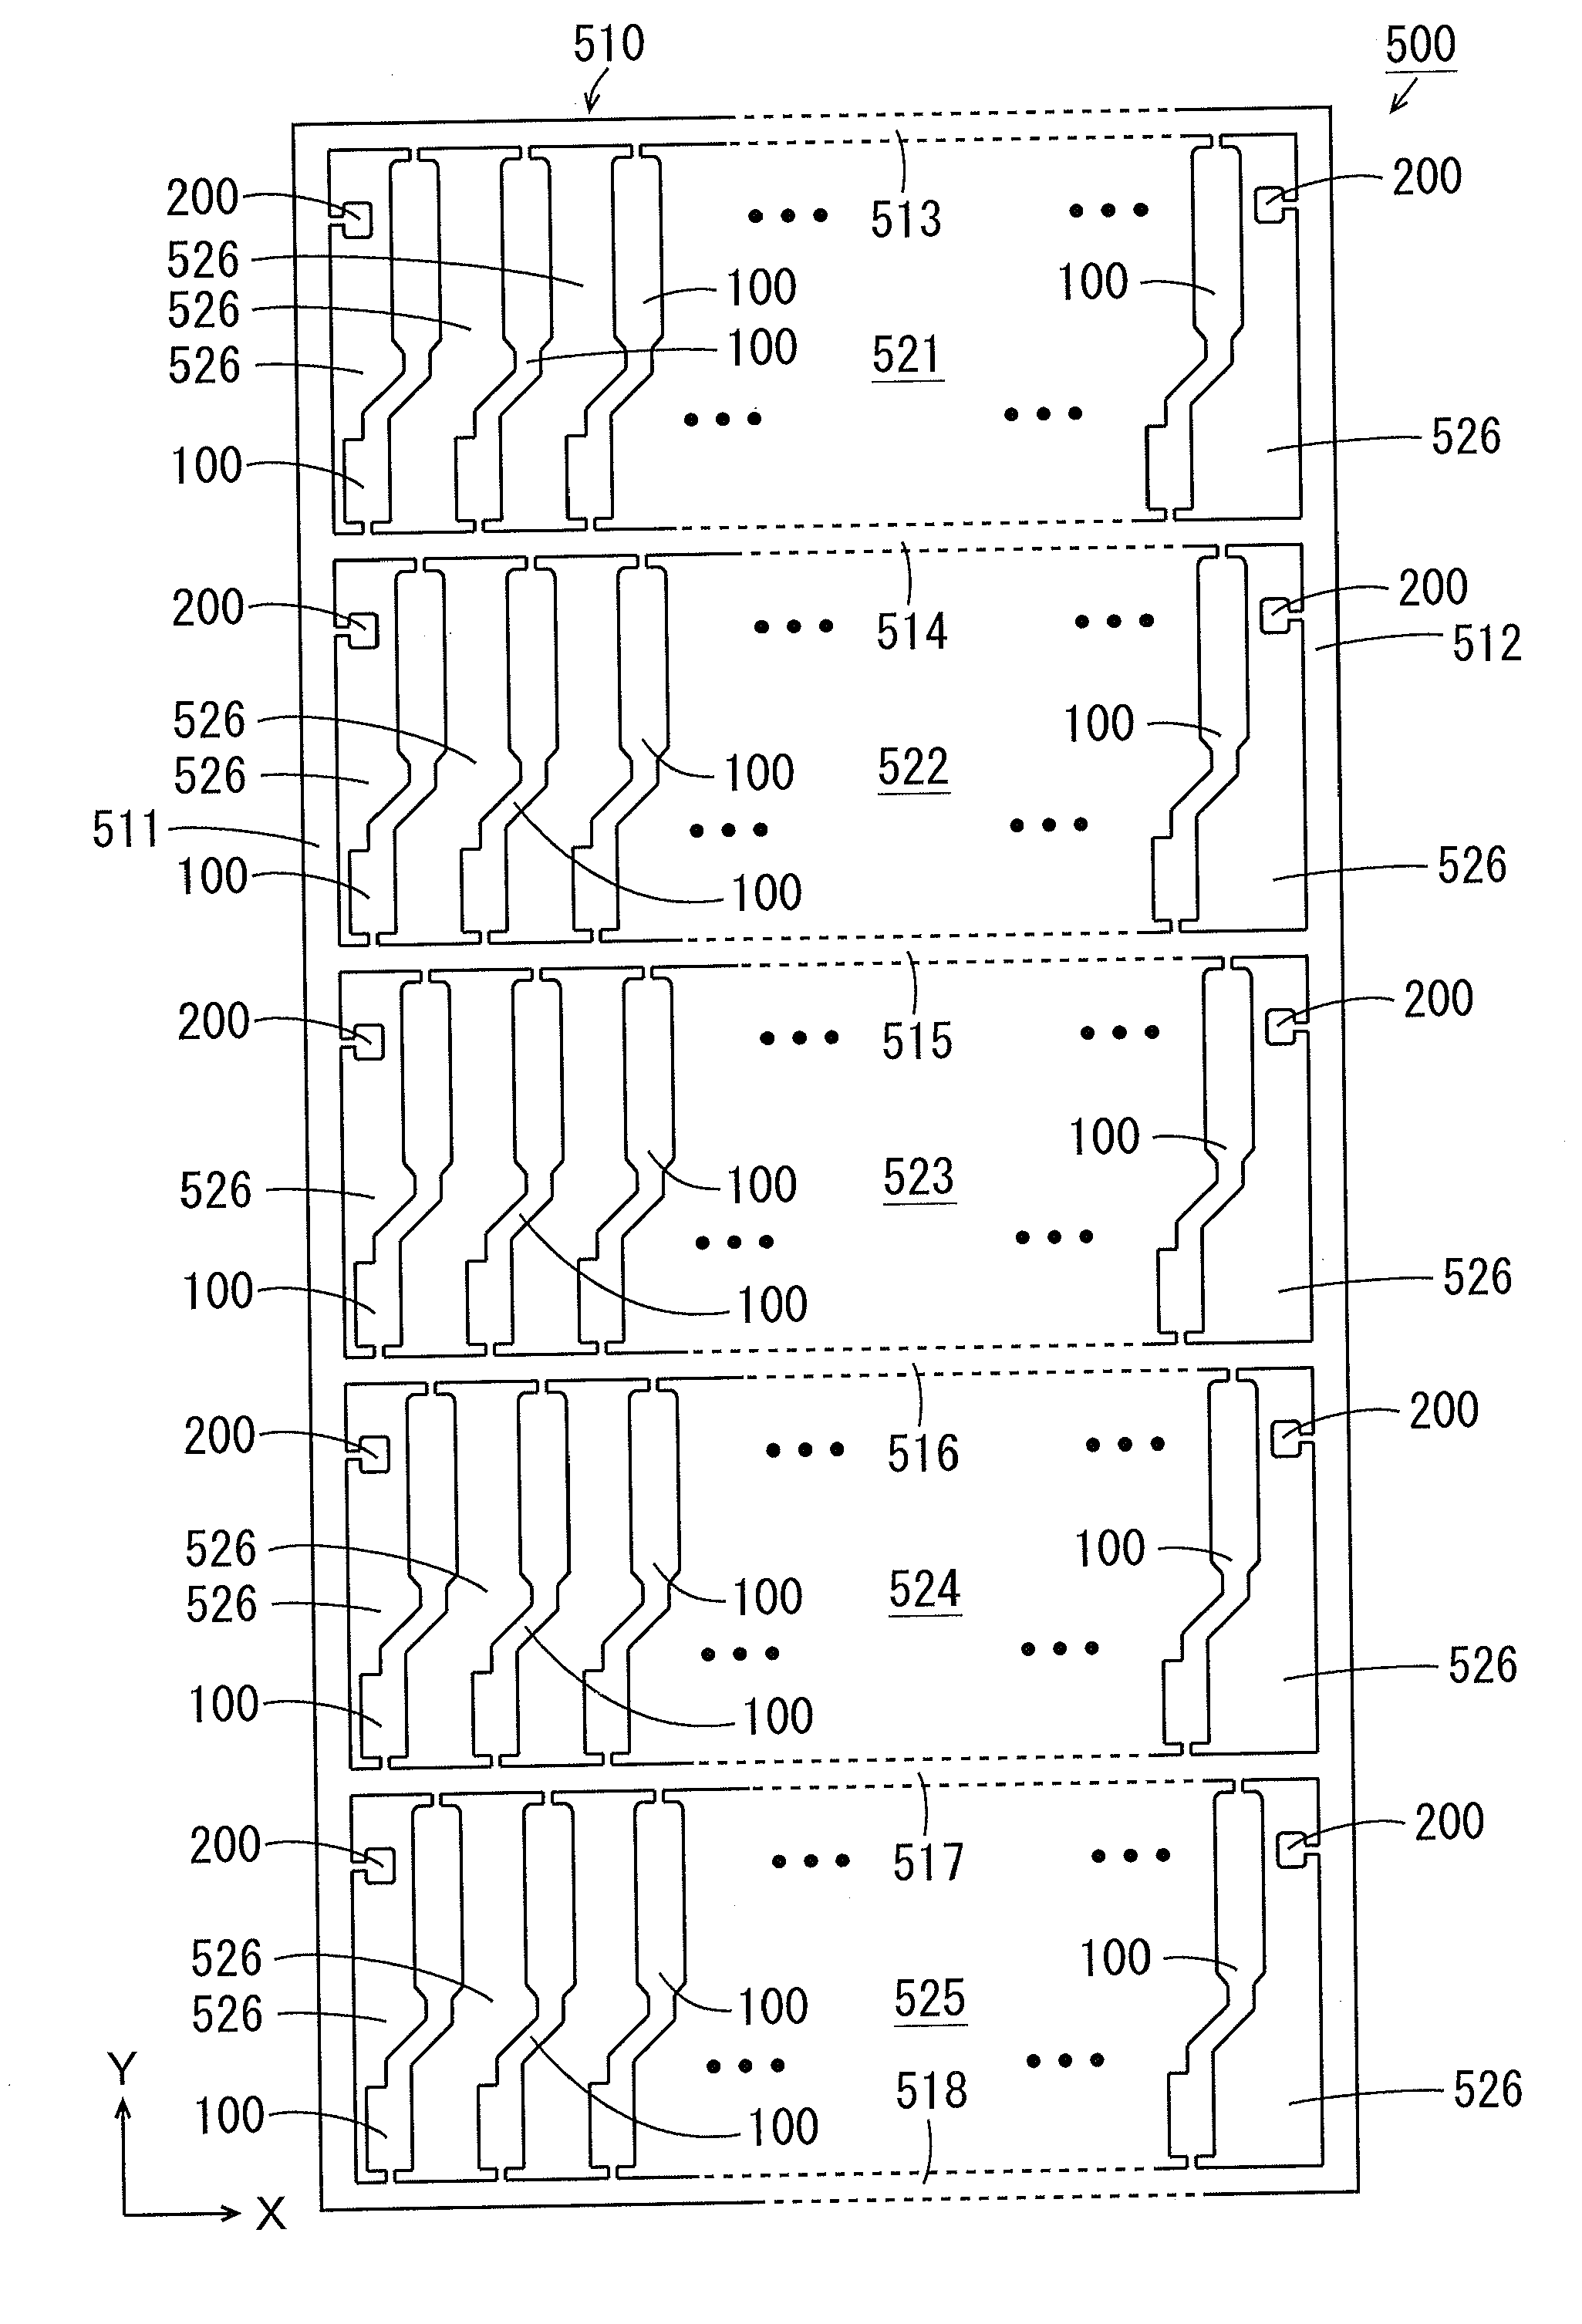 Suspension board assembly sheet with circuits and method for manufacturing the same